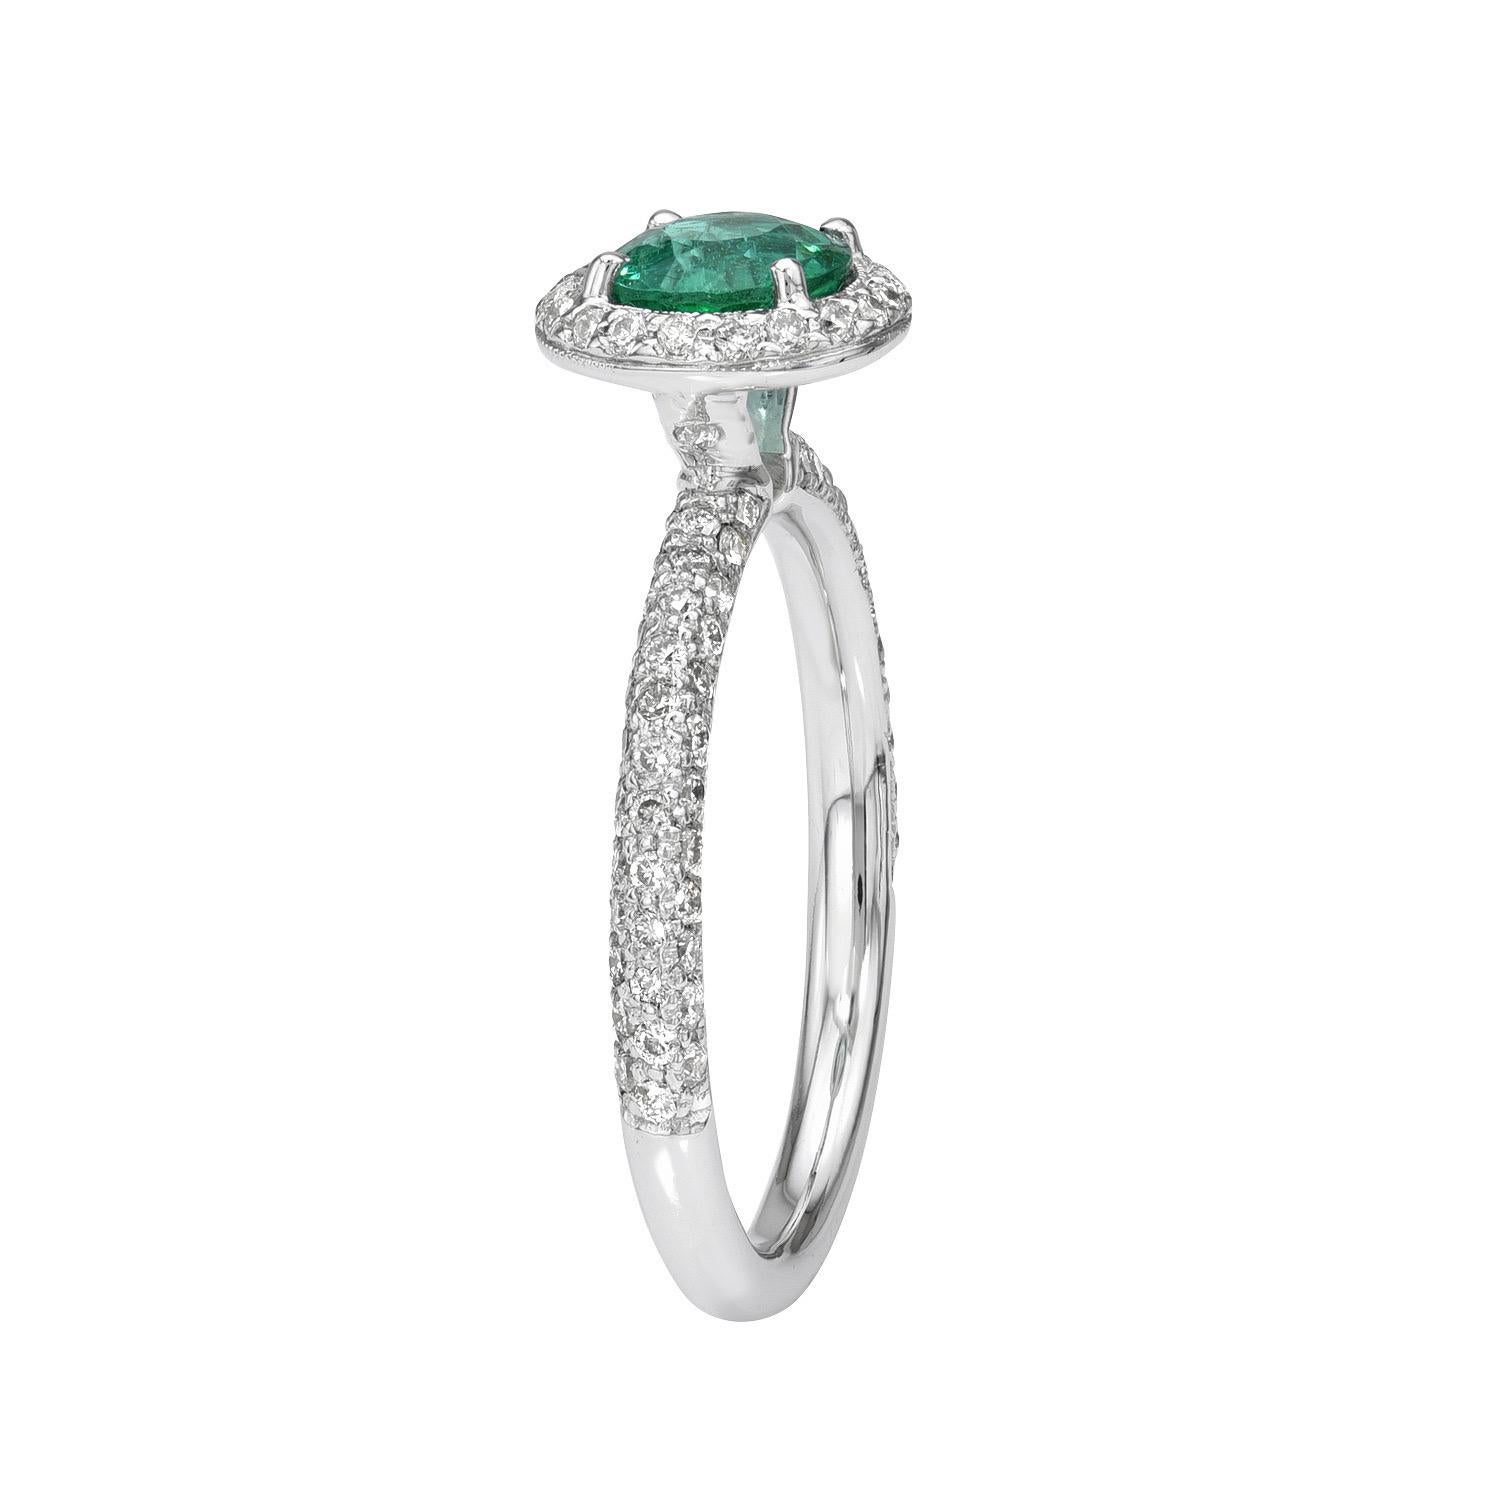 Vibrant 0.77 carat Emerald round 18K white gold engagement ring, decorated with round brilliant diamonds totaling 0.50 carats.
Ring size 6.5. Resizing is complementary upon request.
Returns are accepted and paid by us within 7 days of delivery.